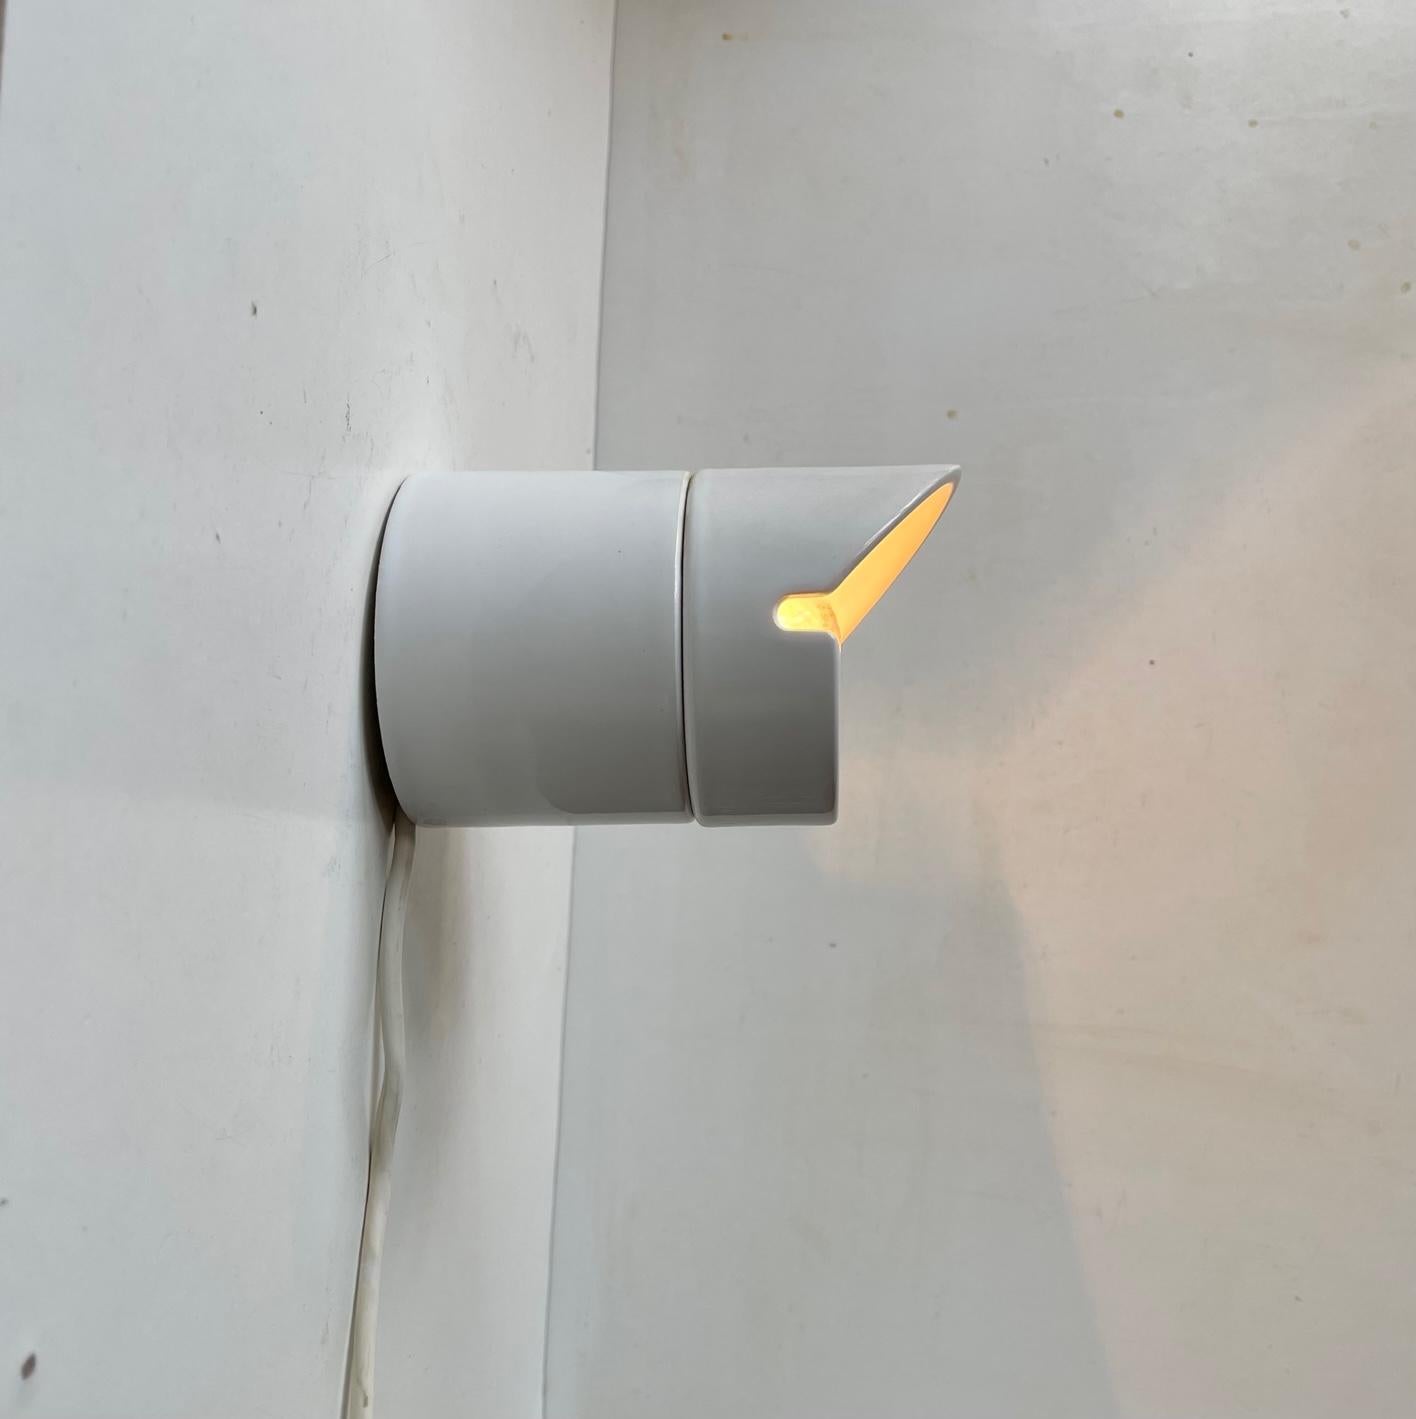 Industrial - Bauhaus inspired bathroom wall light in white porcelain. Model number: 6050b designed by Knud Holscher for Ifö in Sweden and manufactured during the 1980s. Together with Sigvard Bernadotte Holscher stand for some of the most popular ifs